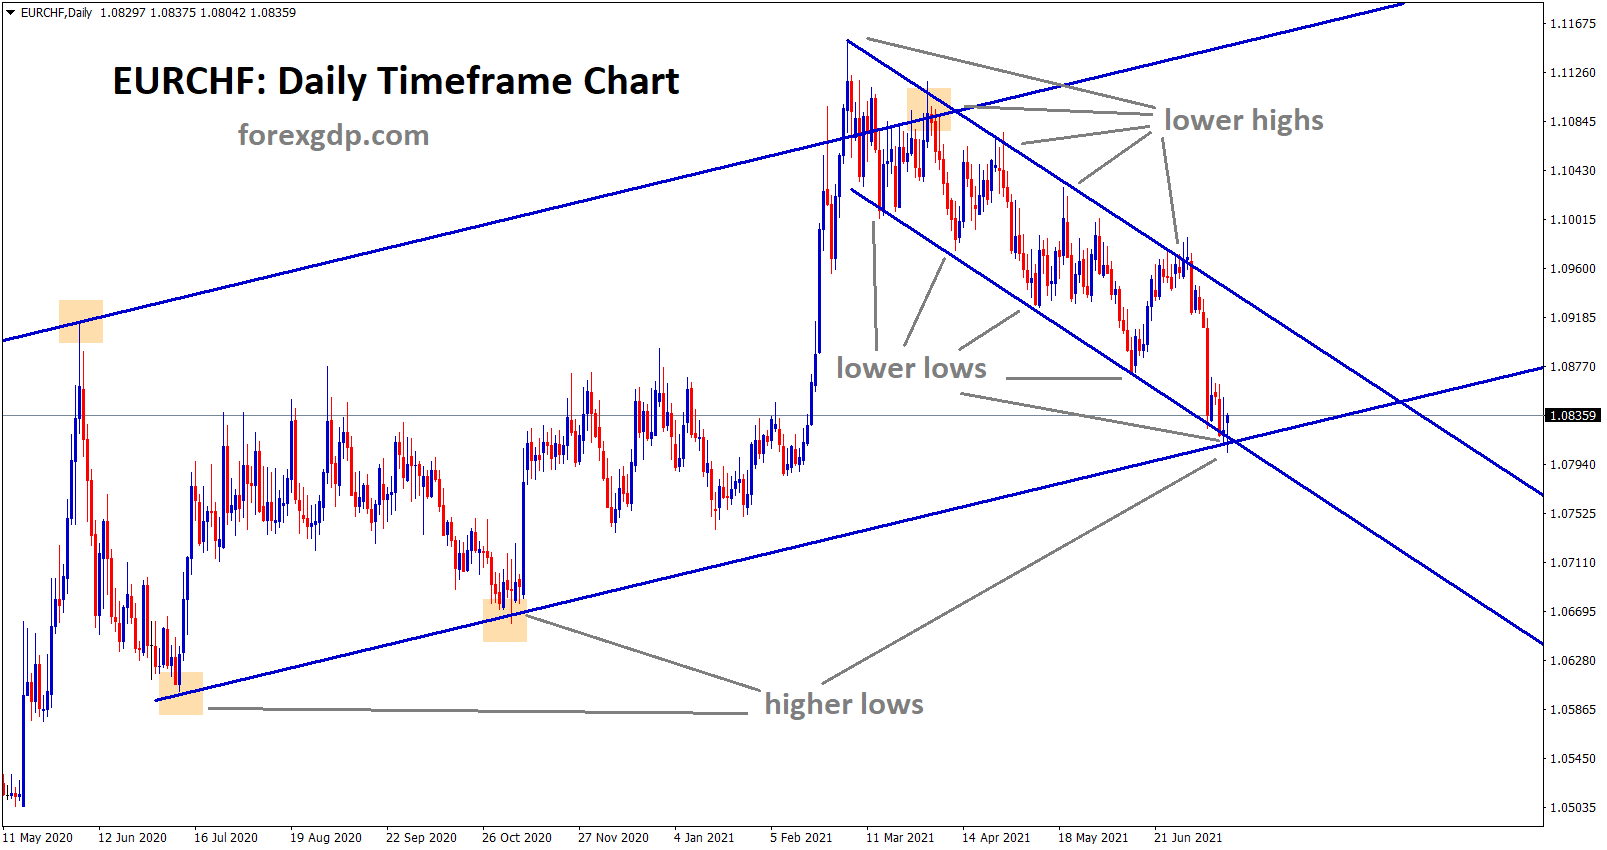 EURCHF has reached the low level in both Ascending and descending channels expecting bounce back